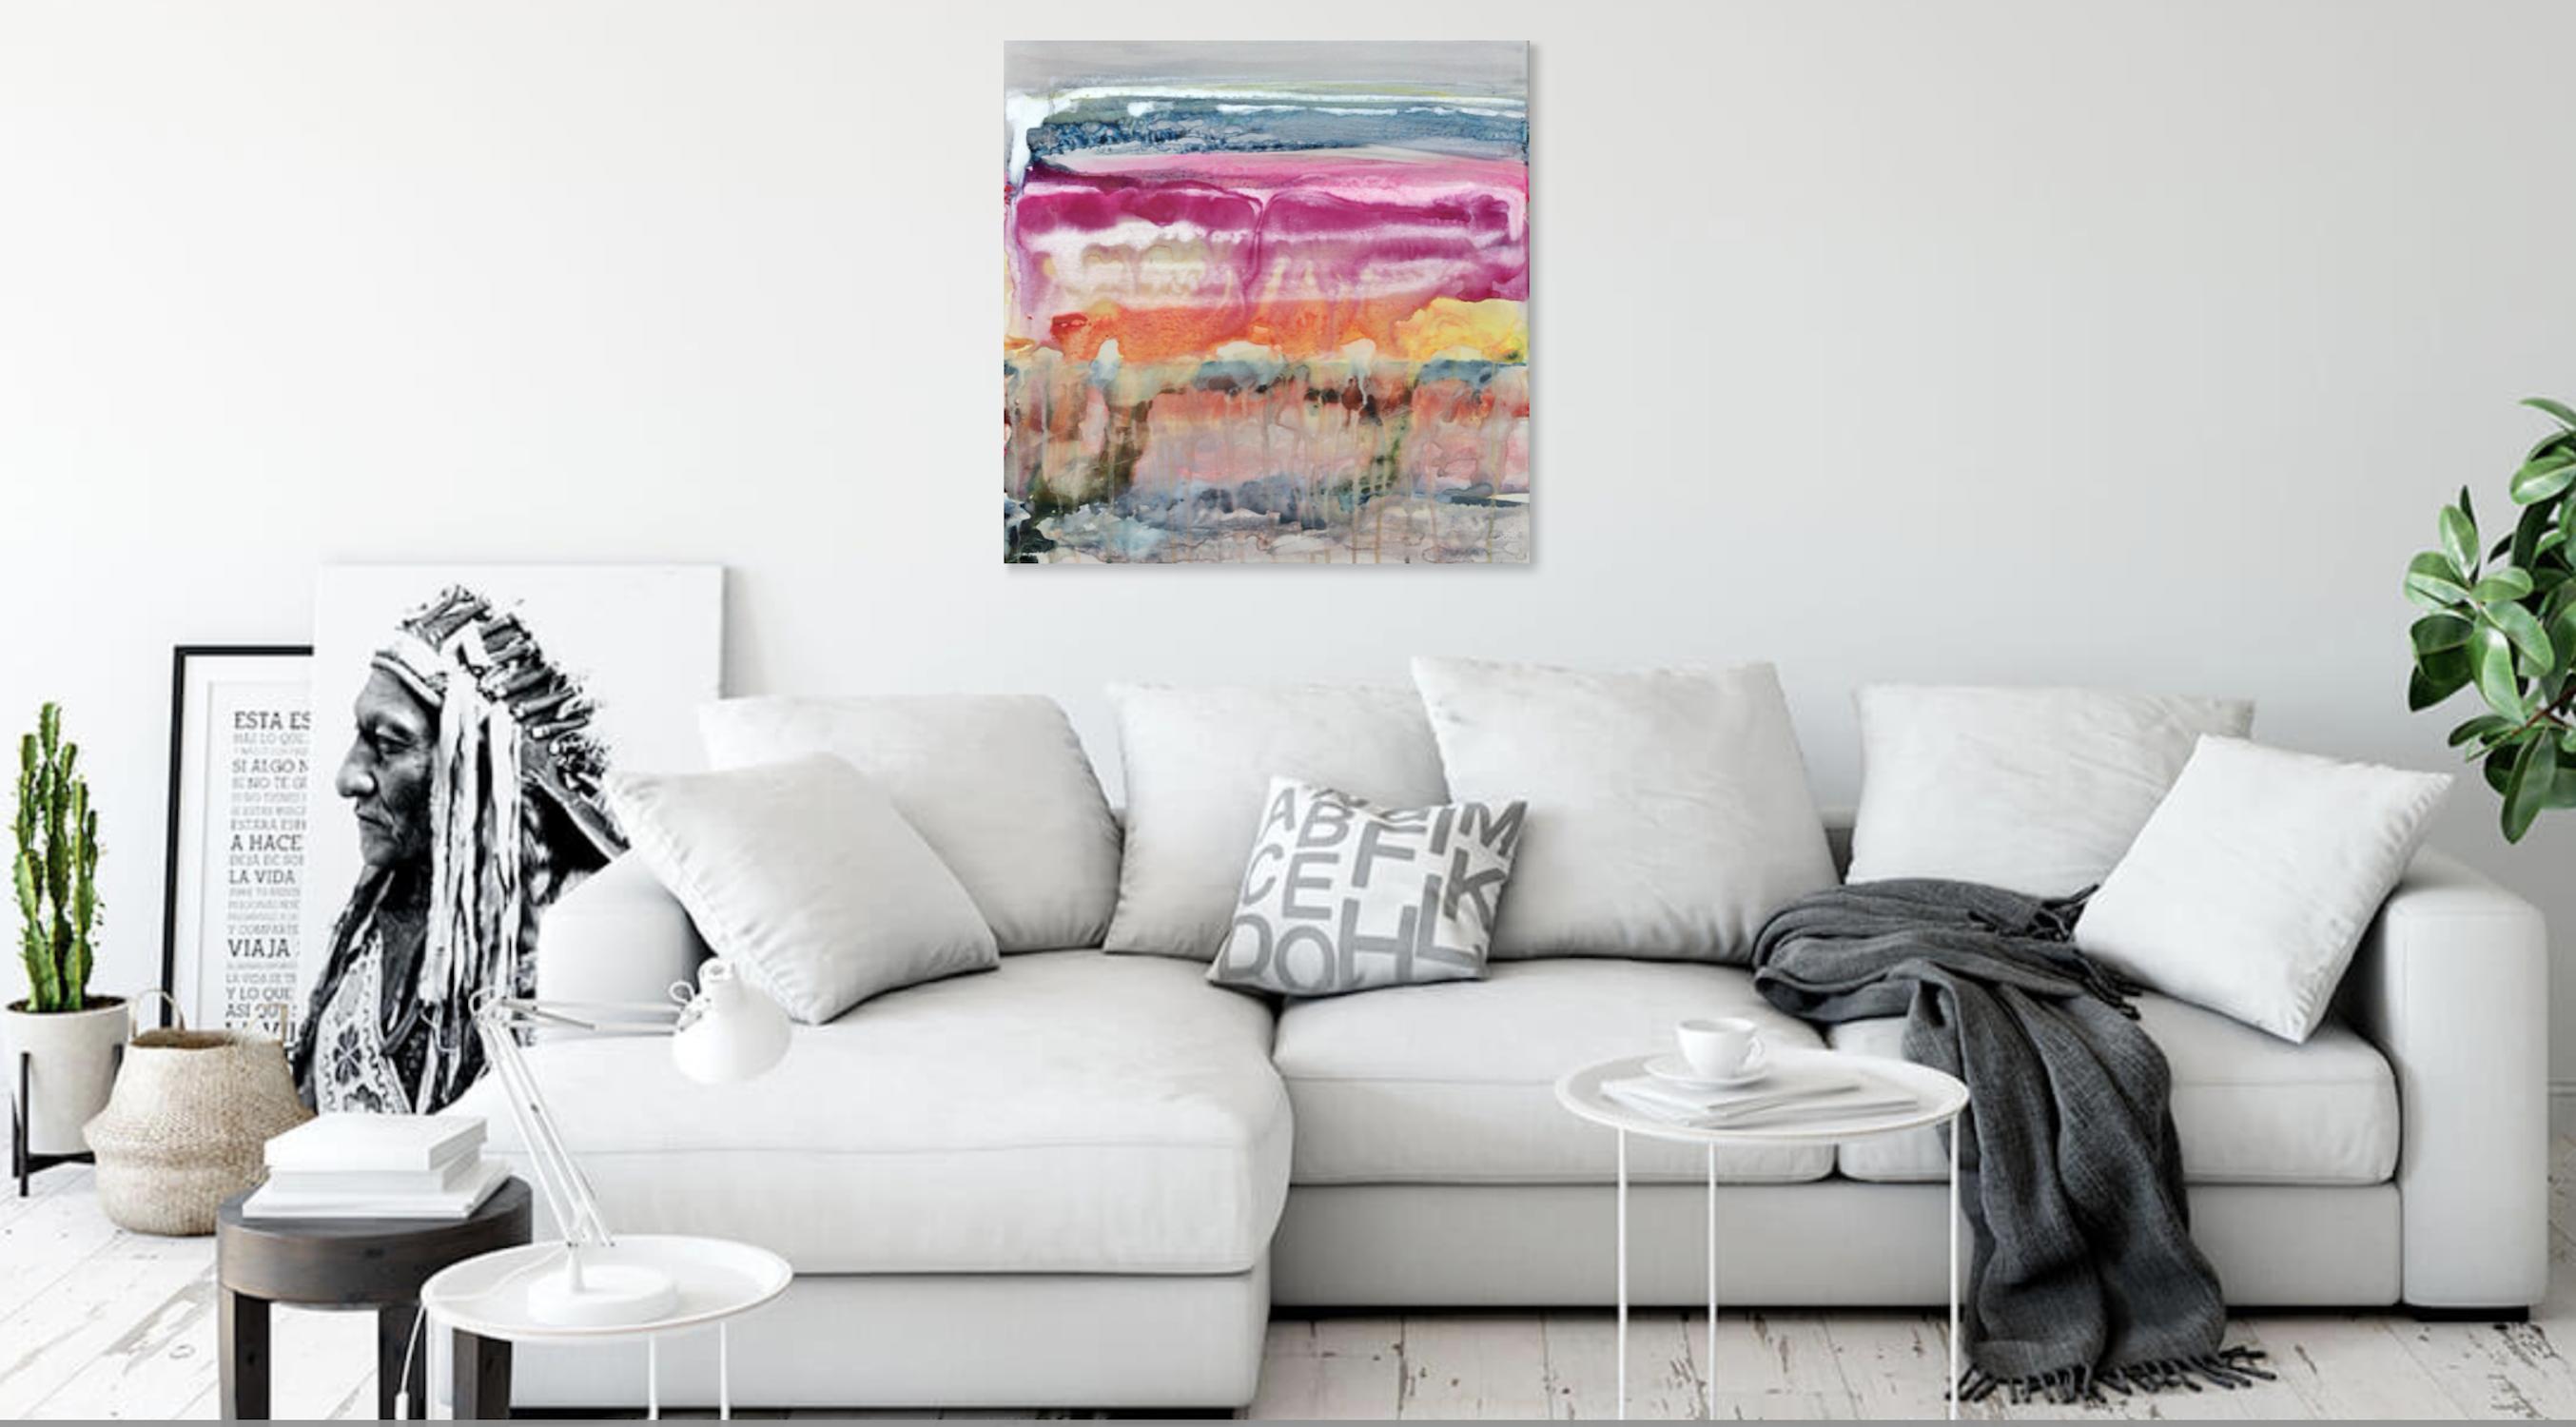 Where My Love Is, Painting, Watercolor on Canvas - Abstract Expressionist Art by Gesa Reuter